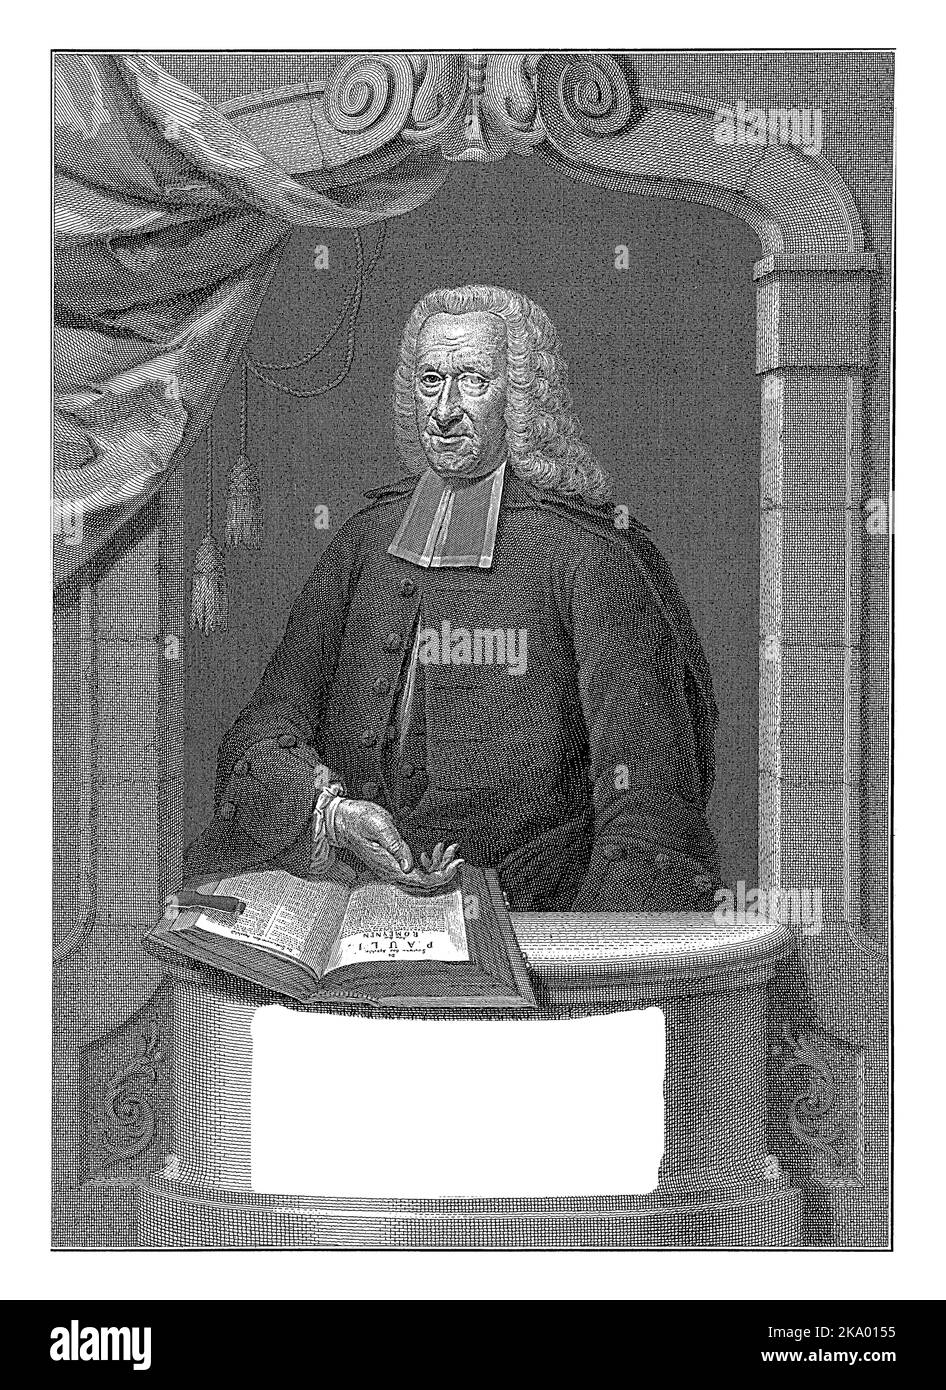 Hermanus van Garel at the age of 72, in an architectural arch-shaped window, with an open bible on the windowsill in front of him (The letter to the R Stock Photo